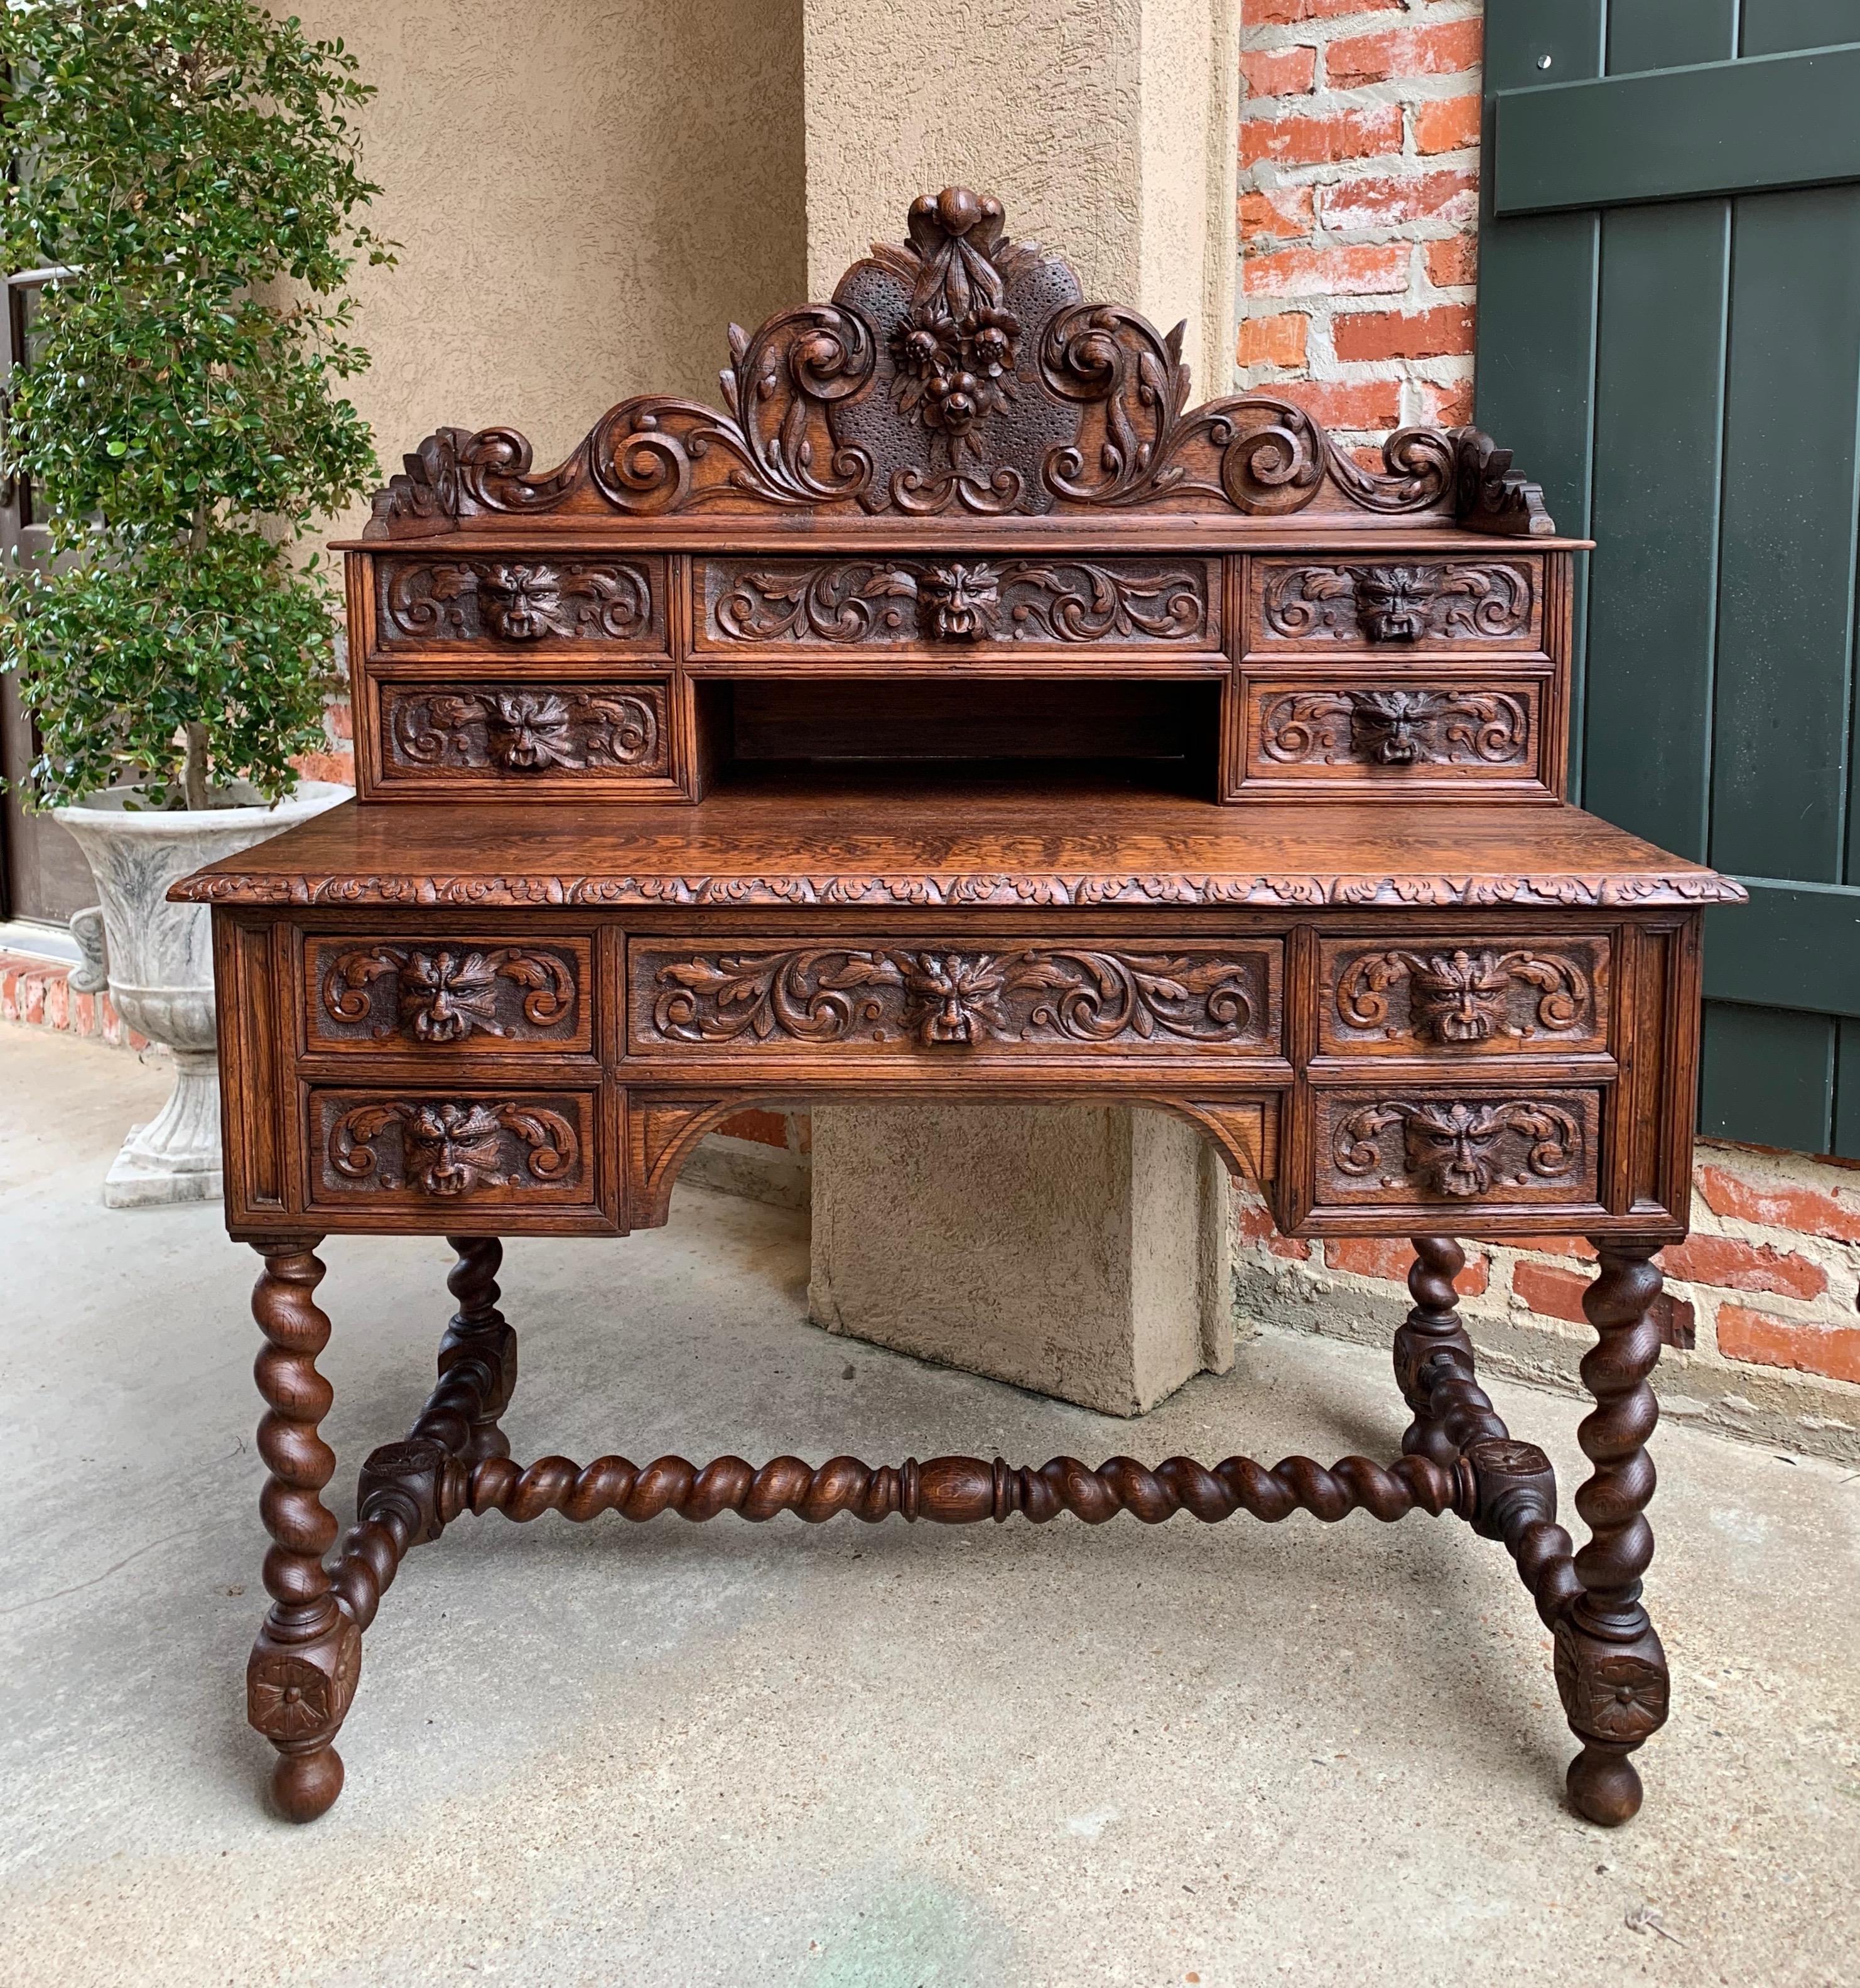 Direct from France, one of the most beautifully carved antique French desks we have seen…ever!~
~The tall back crown has a large Black Forest style dimensionally carved plaque with center flowers and foliage, flanked by scrolls and flourishes with